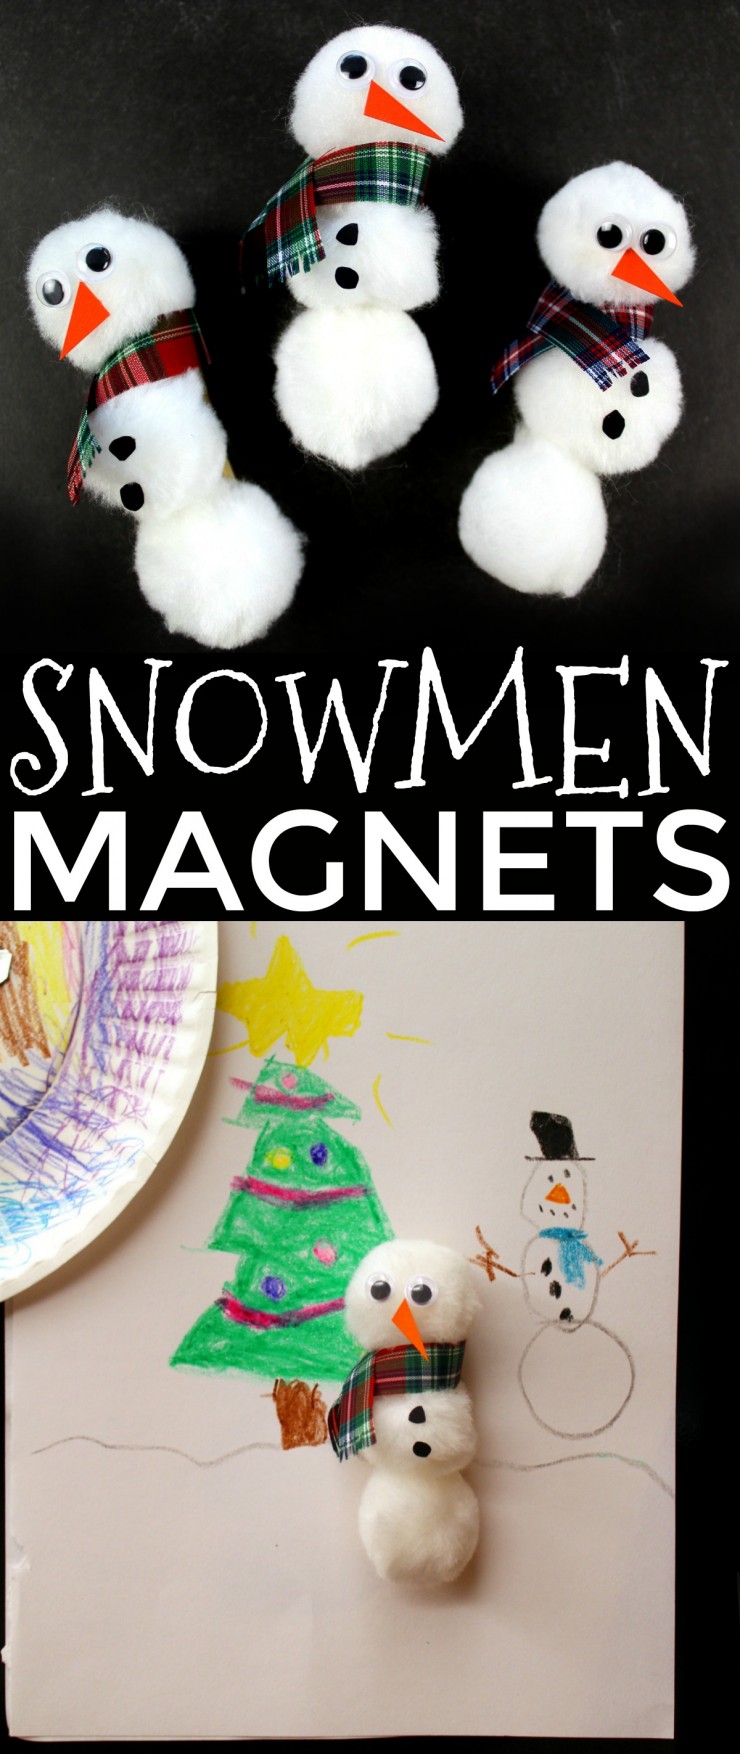 These adorable pom pom snowmen magnets are a fun winter craft for you or for the kids to get in on. They are really simple to make and are perfect for displaying your kids artwork on the fridge!